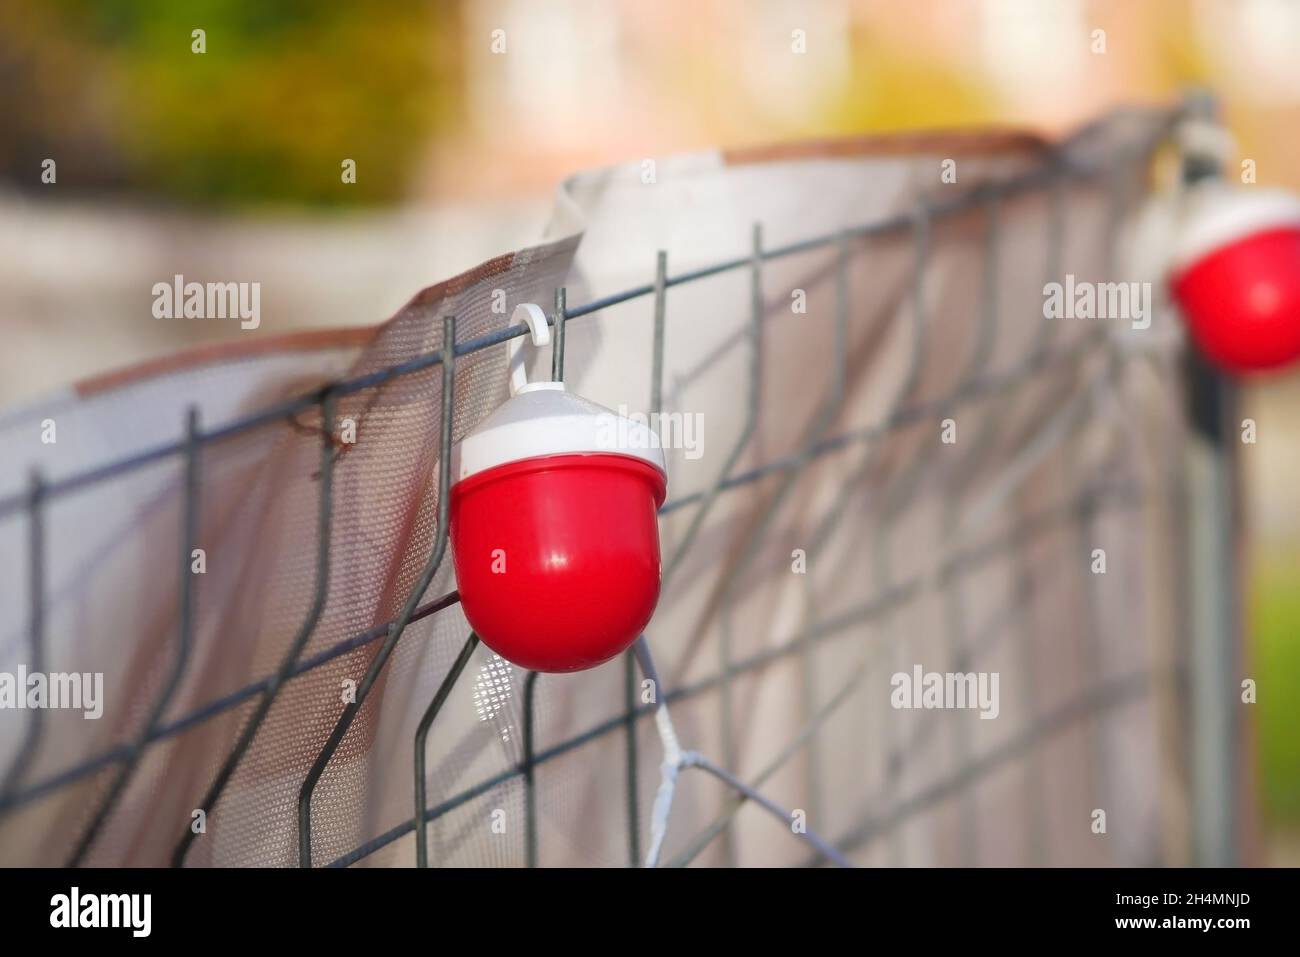 City street with temporary fencing during construction work, red close-up lamp. Construction red lamp on the fence. Copy space Stock Photo